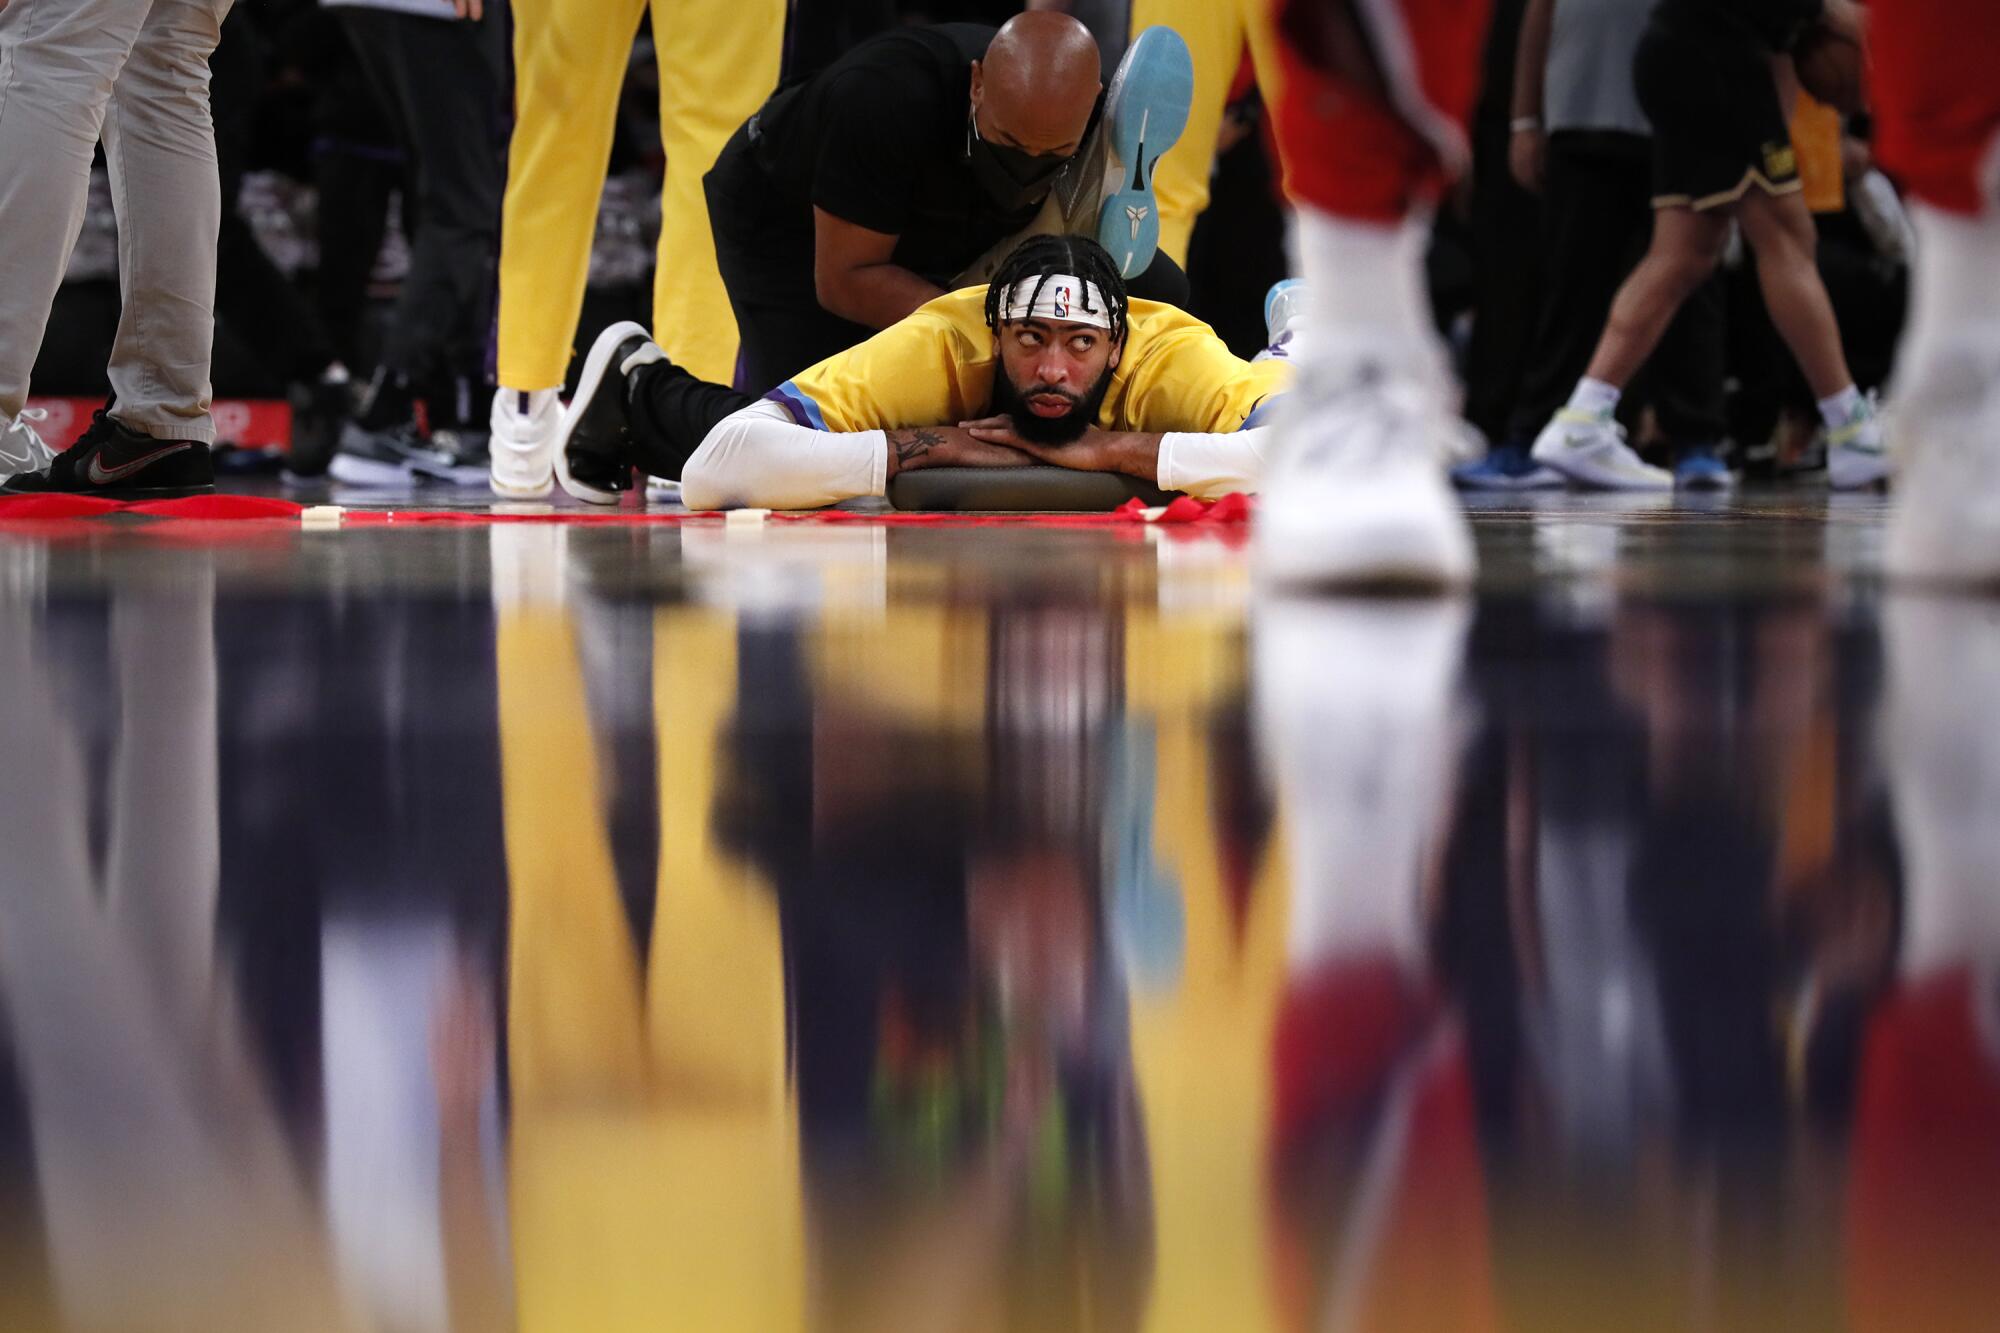 Lakers forward Anthony Davis stretches at midcourt before a game against the Chicago Bulls.